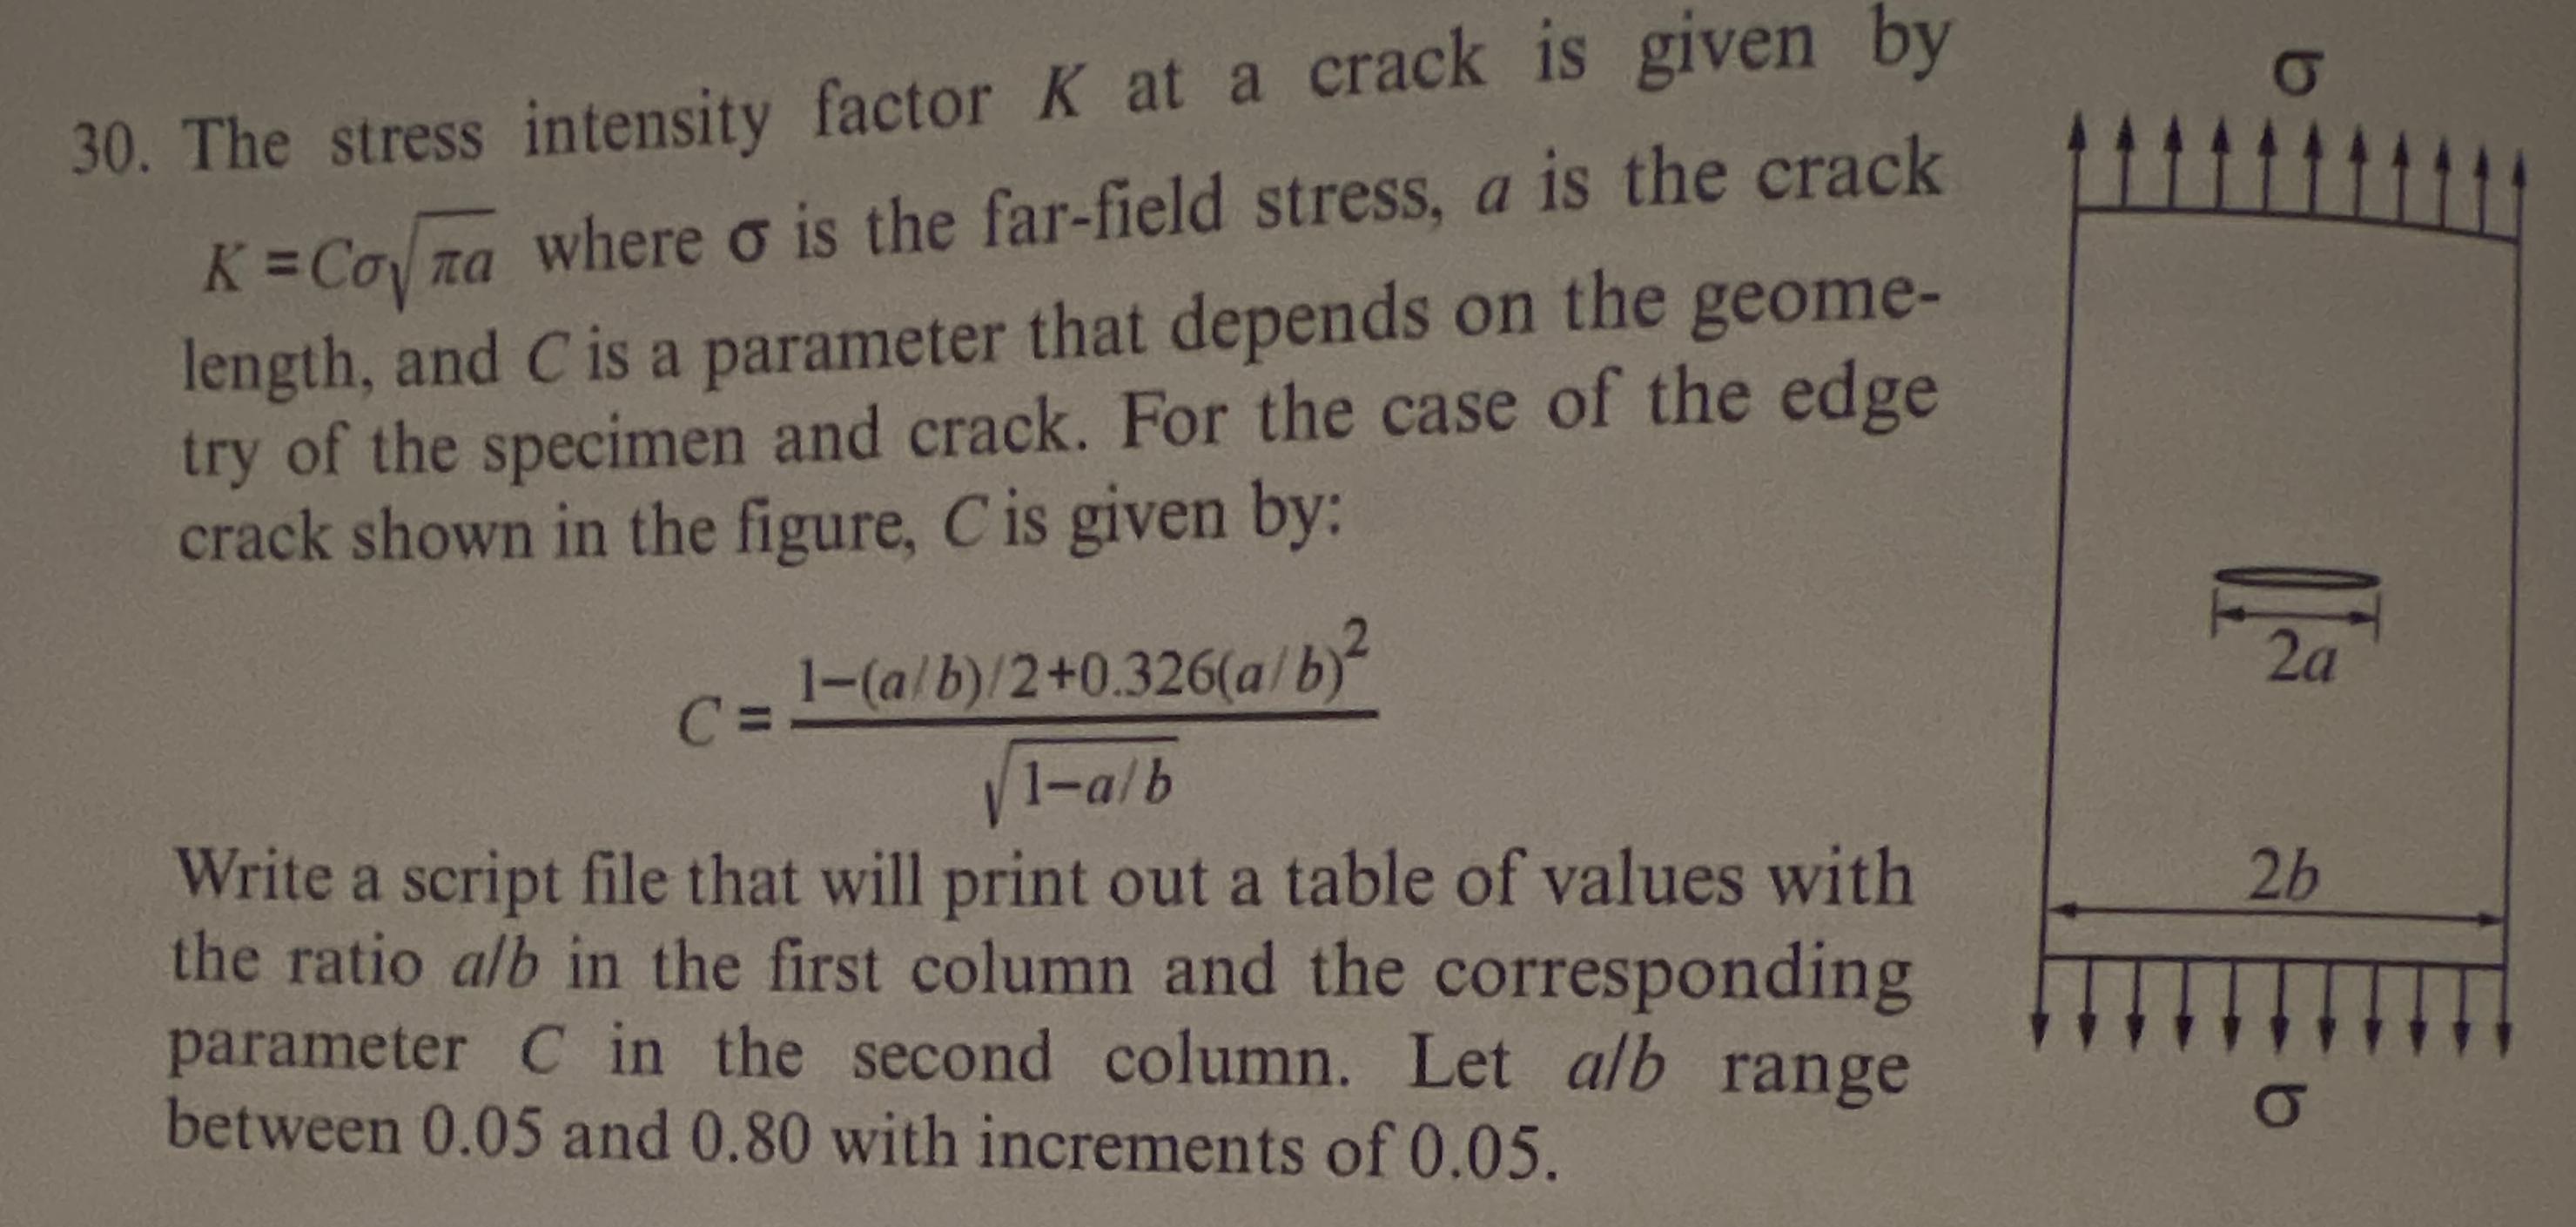 30. The stress intensity factor K at a crack is given by K=Co na where o is the far-field stress, a is the